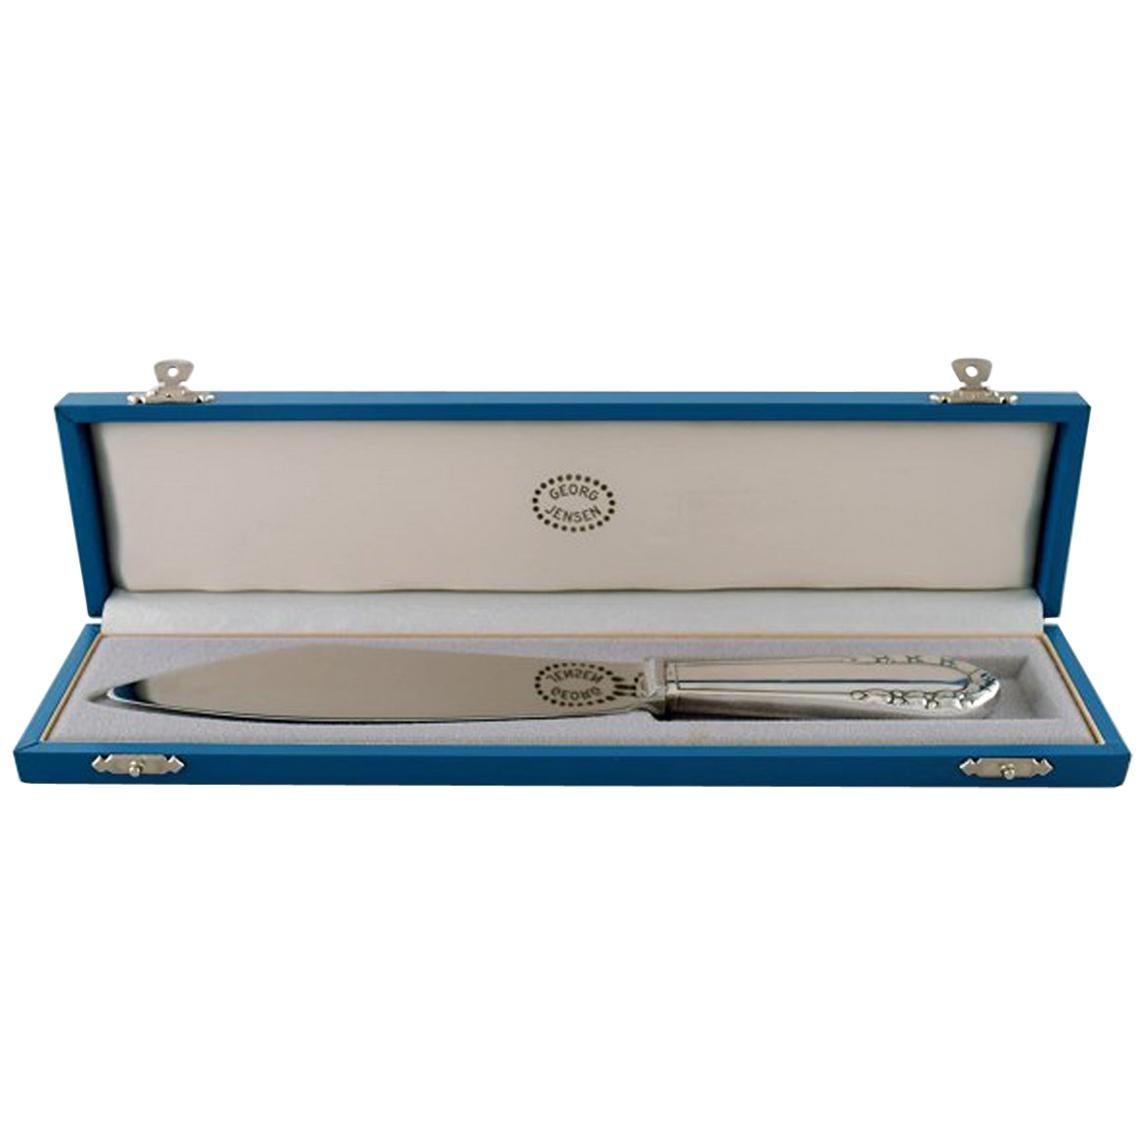 Georg Jensen 'Lily of the Valley' Layer Cake Knife with Original Box